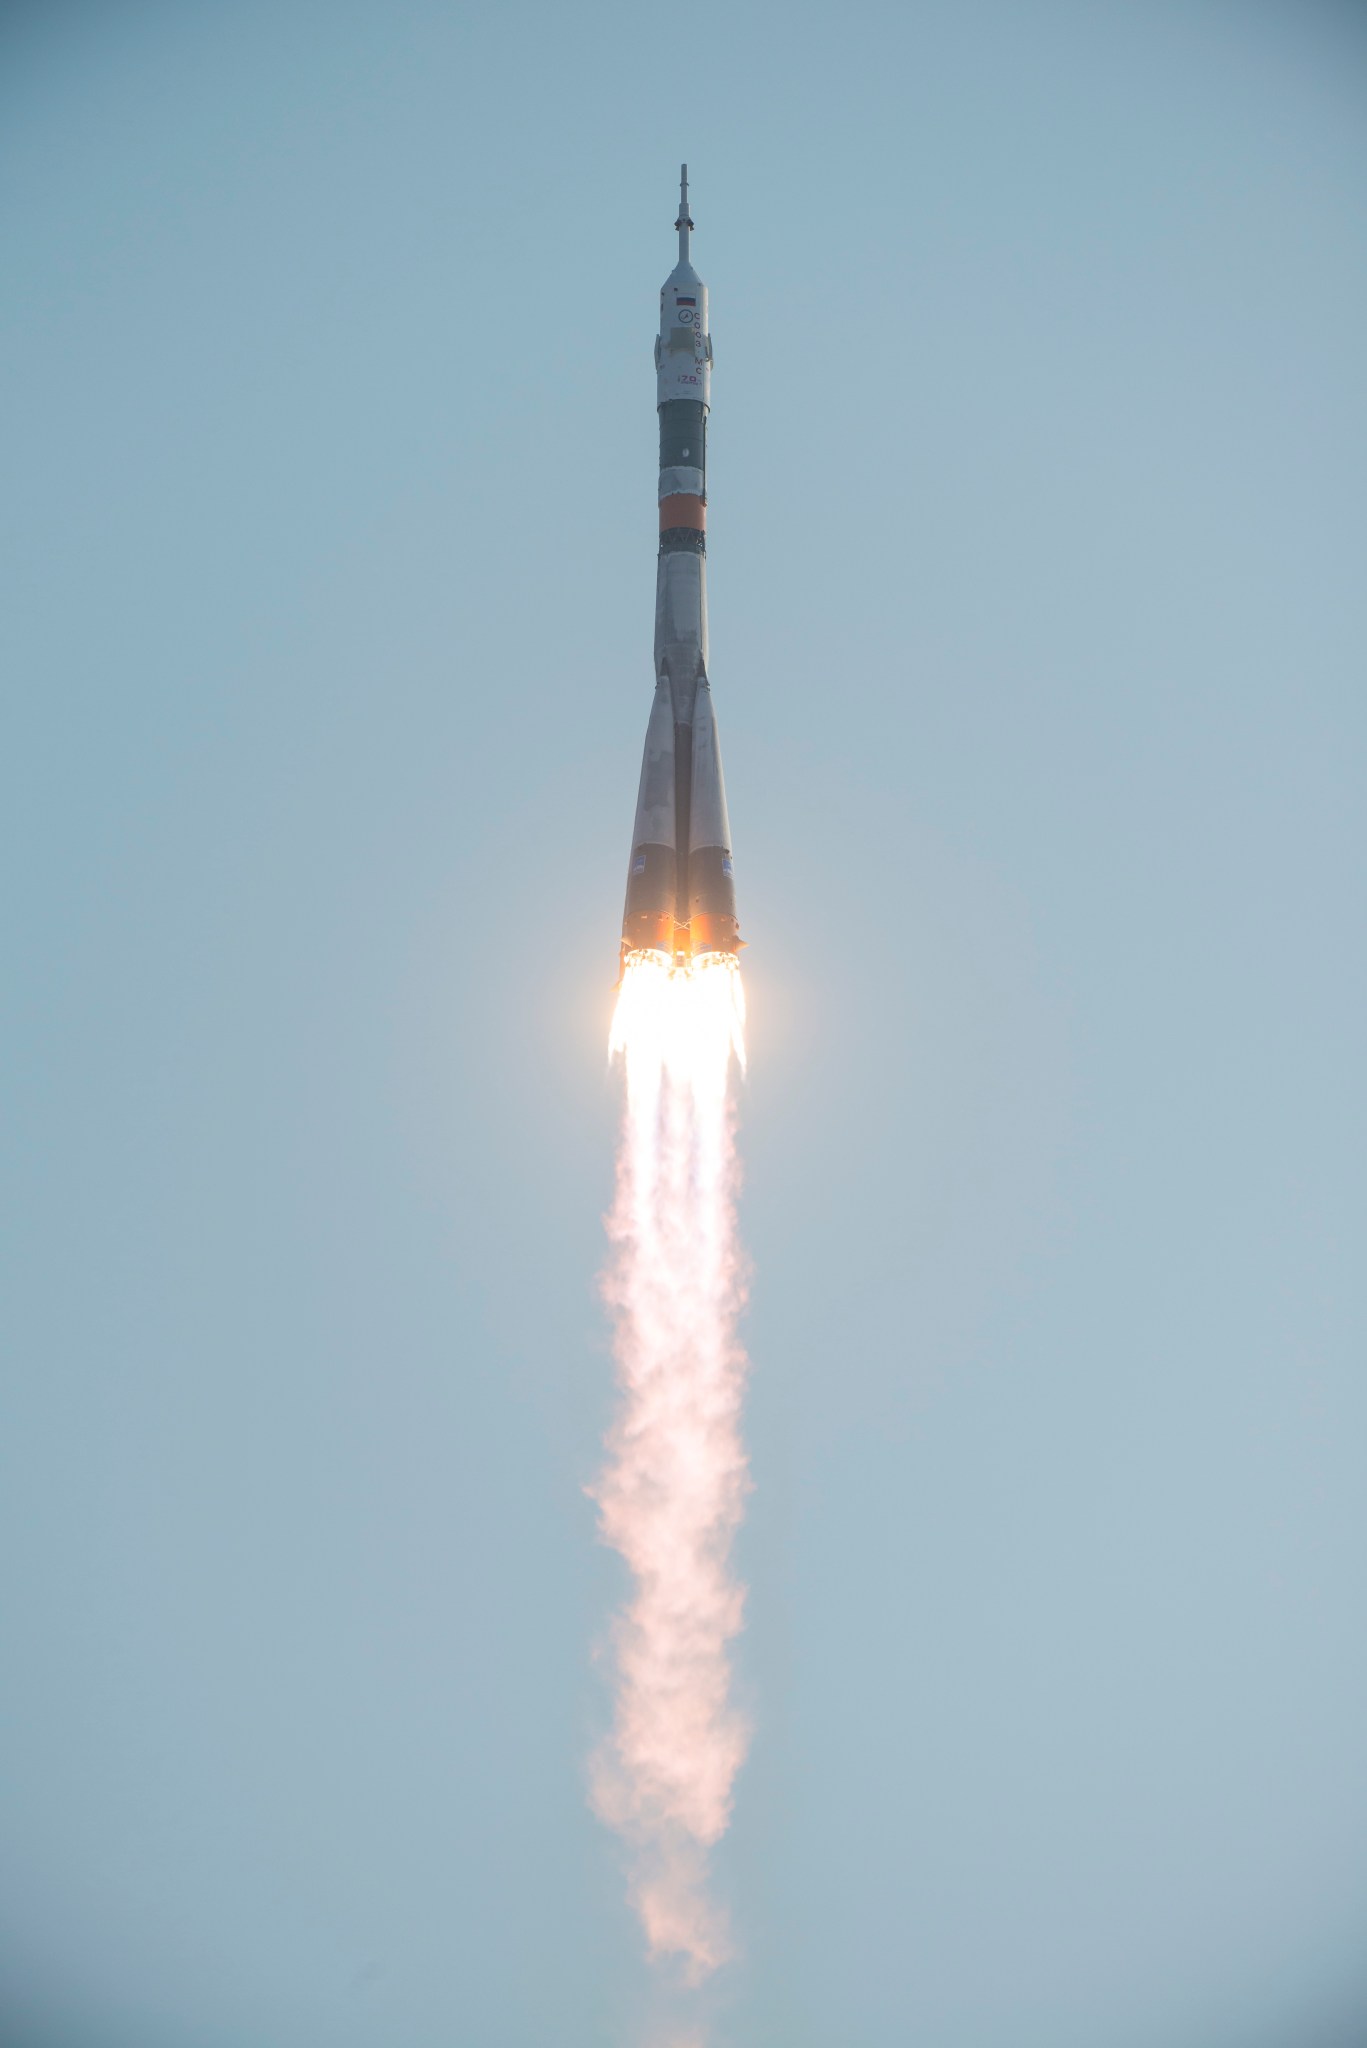 Soyuz MS-01 spacecraft launches from the Baikonur Cosmodrome with Expedition 48-49 crew members 